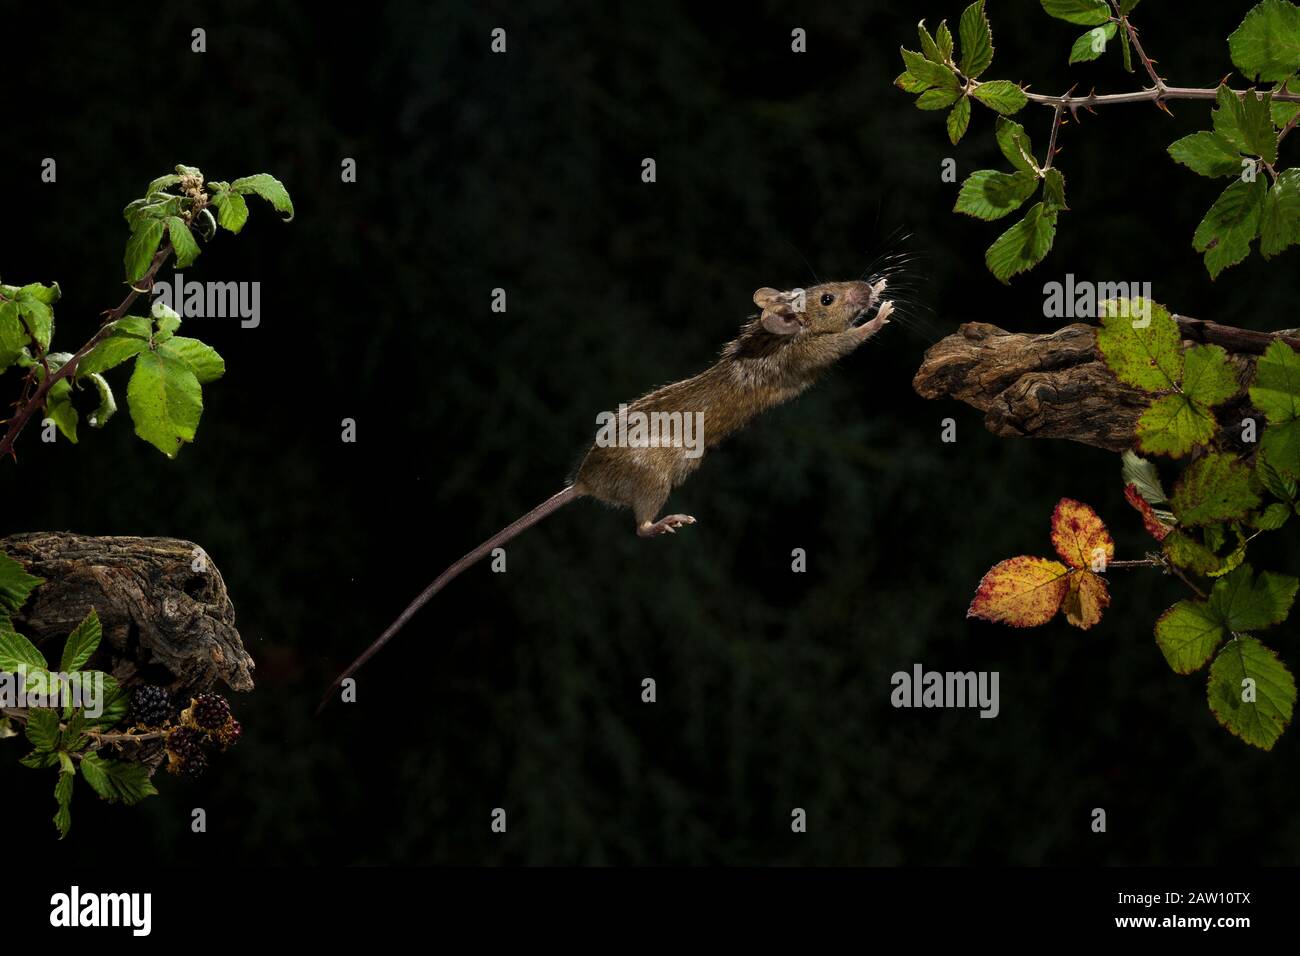 Wood mouse (Apodemus sylvaticus) jumping between branches, Spain Stock Photo